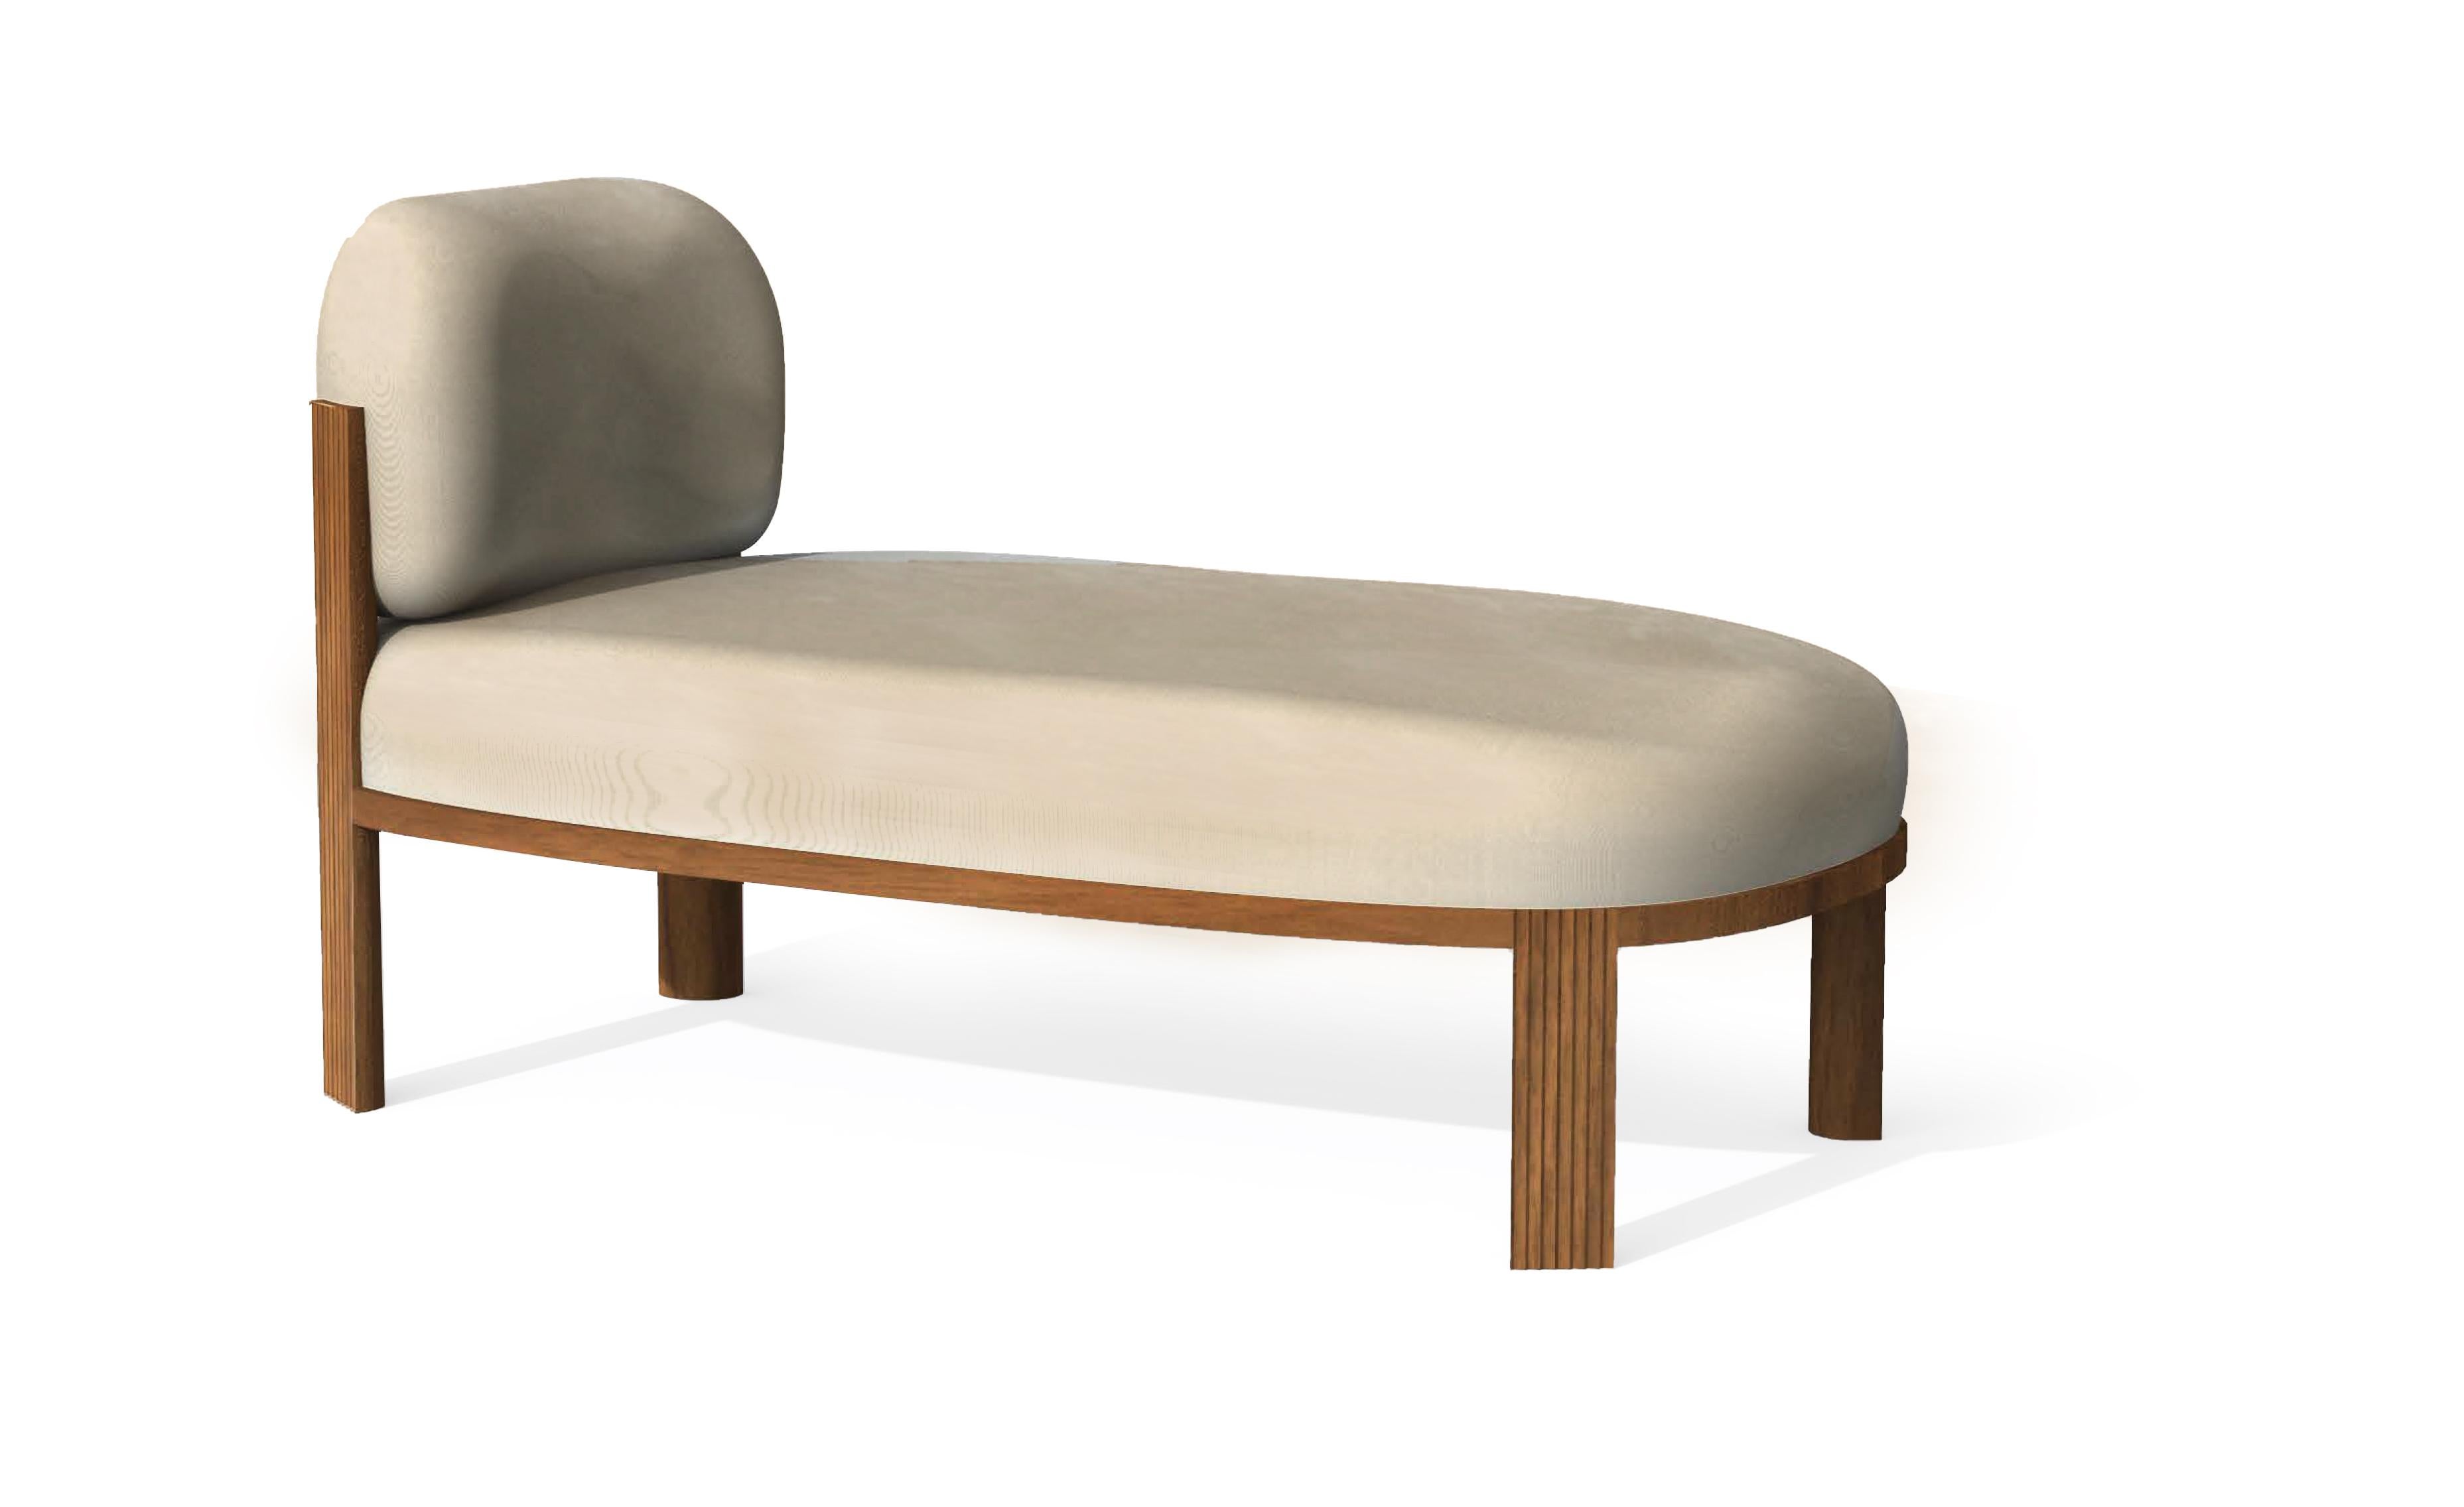 Portuguese Unique Daybed by Collector